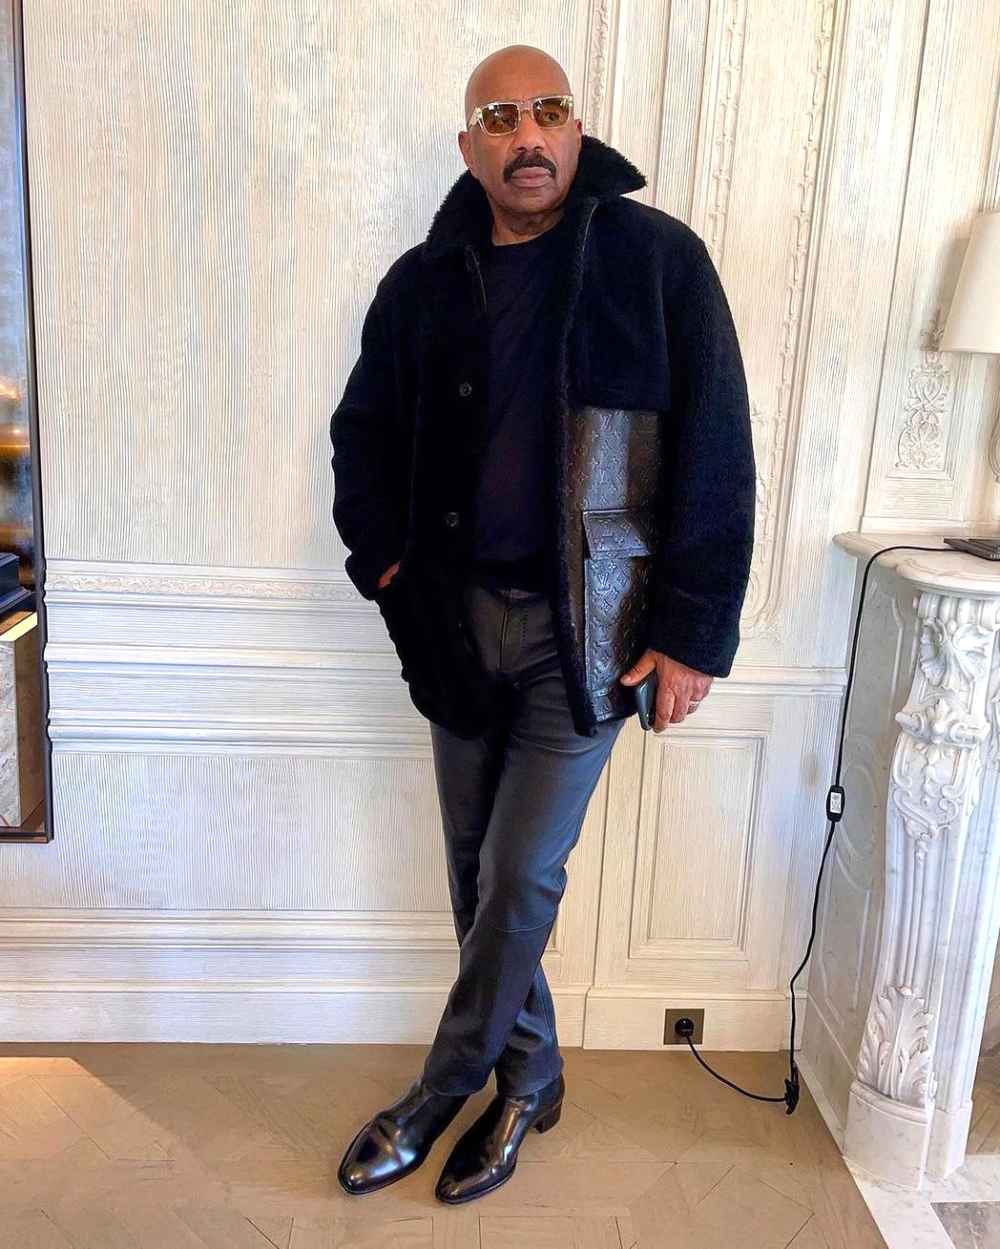 Steve Harvey, 64, Is Determined to Keep His Outfits Trendy: ‘I Don’t Want to Dress Old’